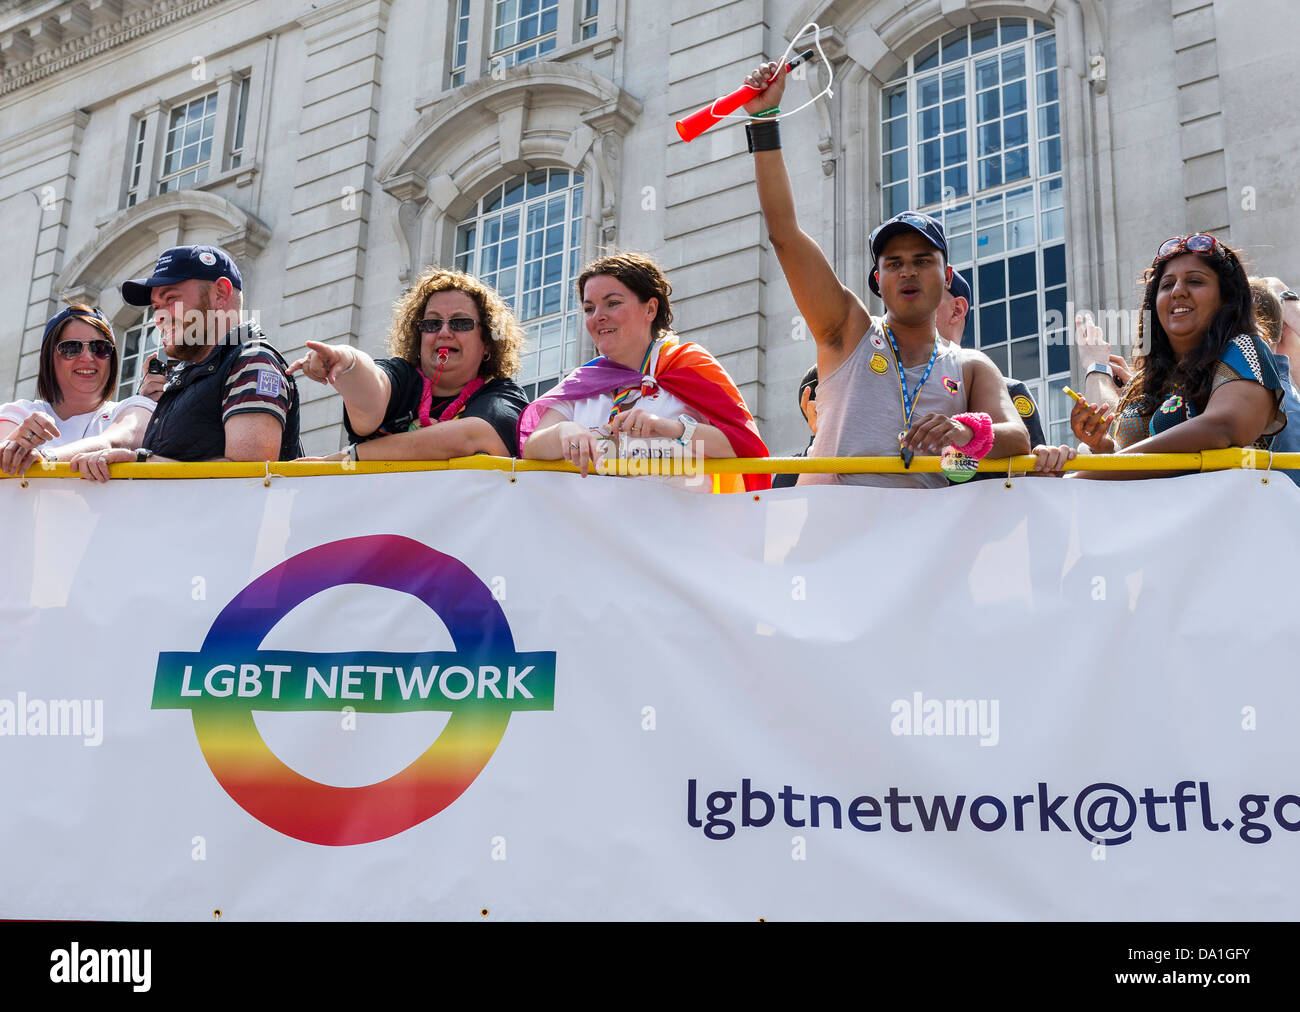 29th June 2013. The London Pride parade on Regent's Street in London. Photographer: Gordon Scammell Stock Photo